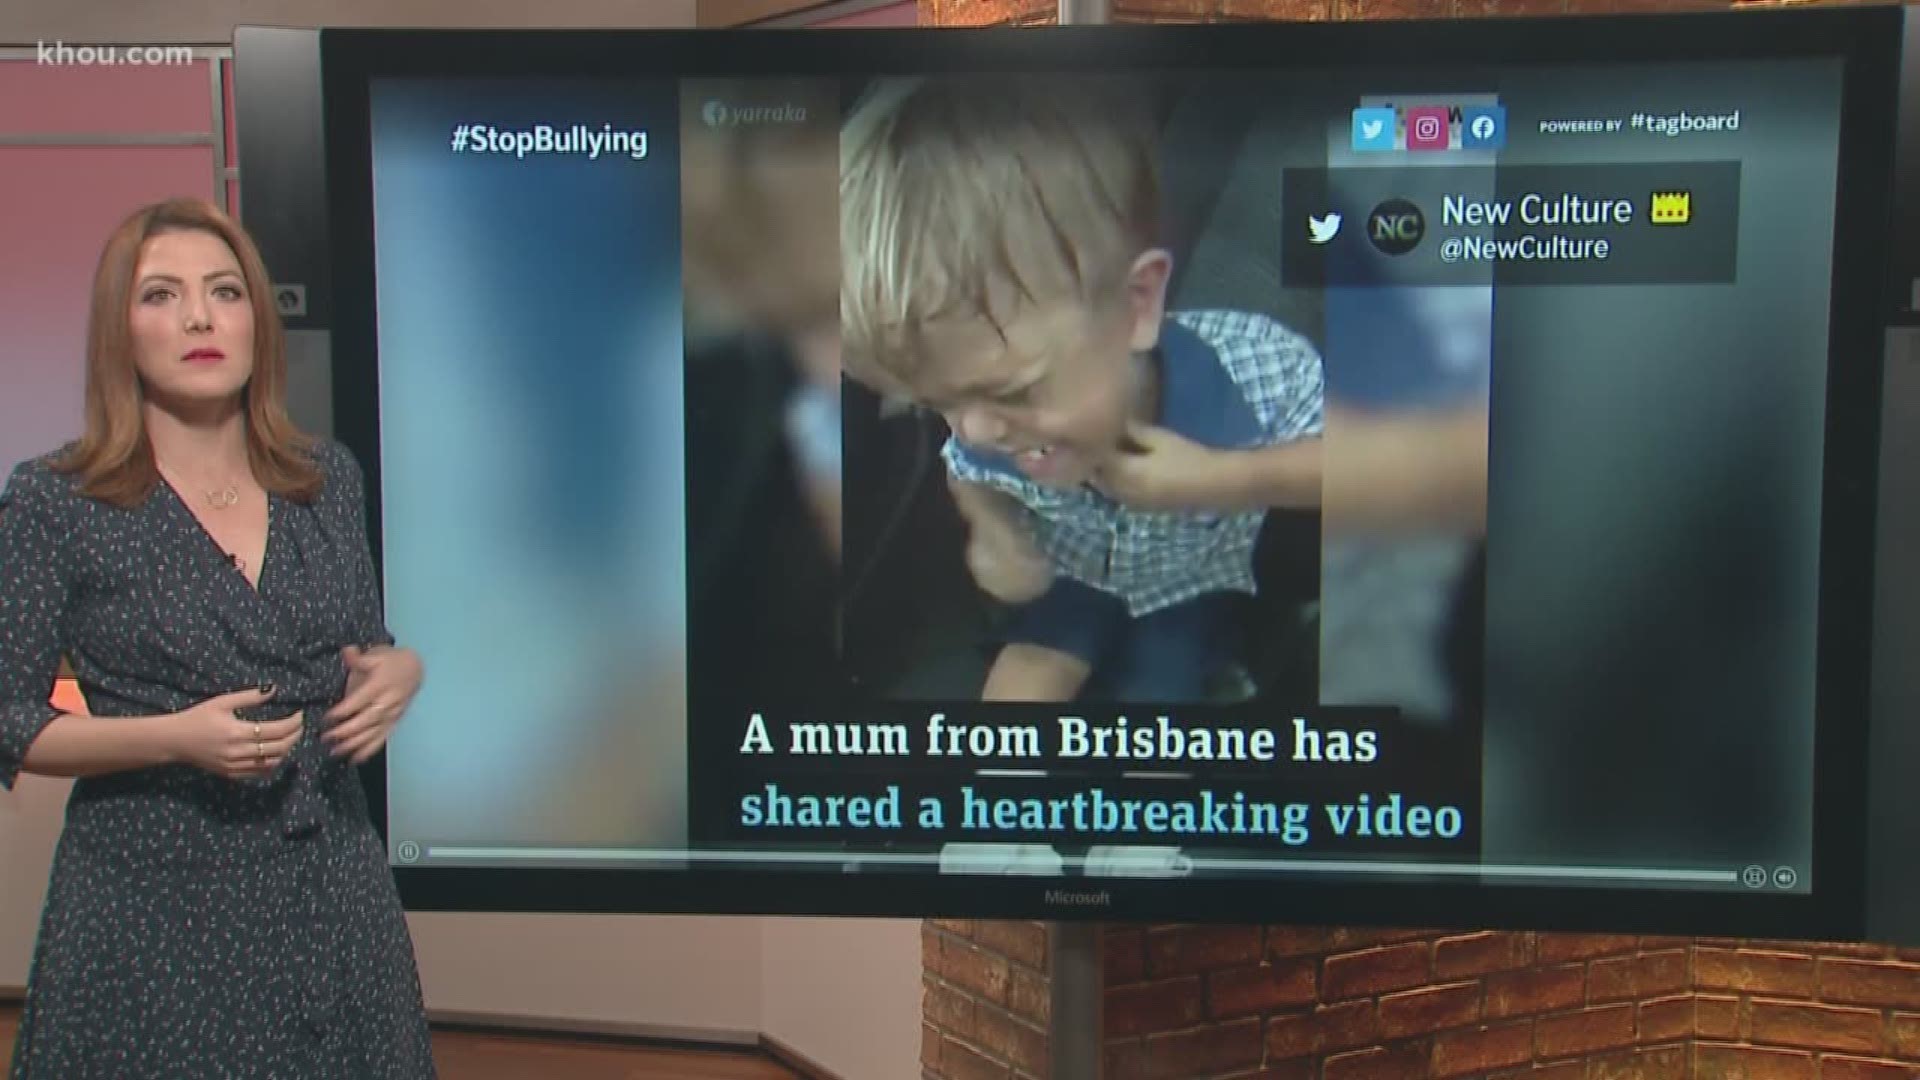 Messages of love and support are flowing in on social media after an Australian mom shared this video of her 9-year-old son Quaden.